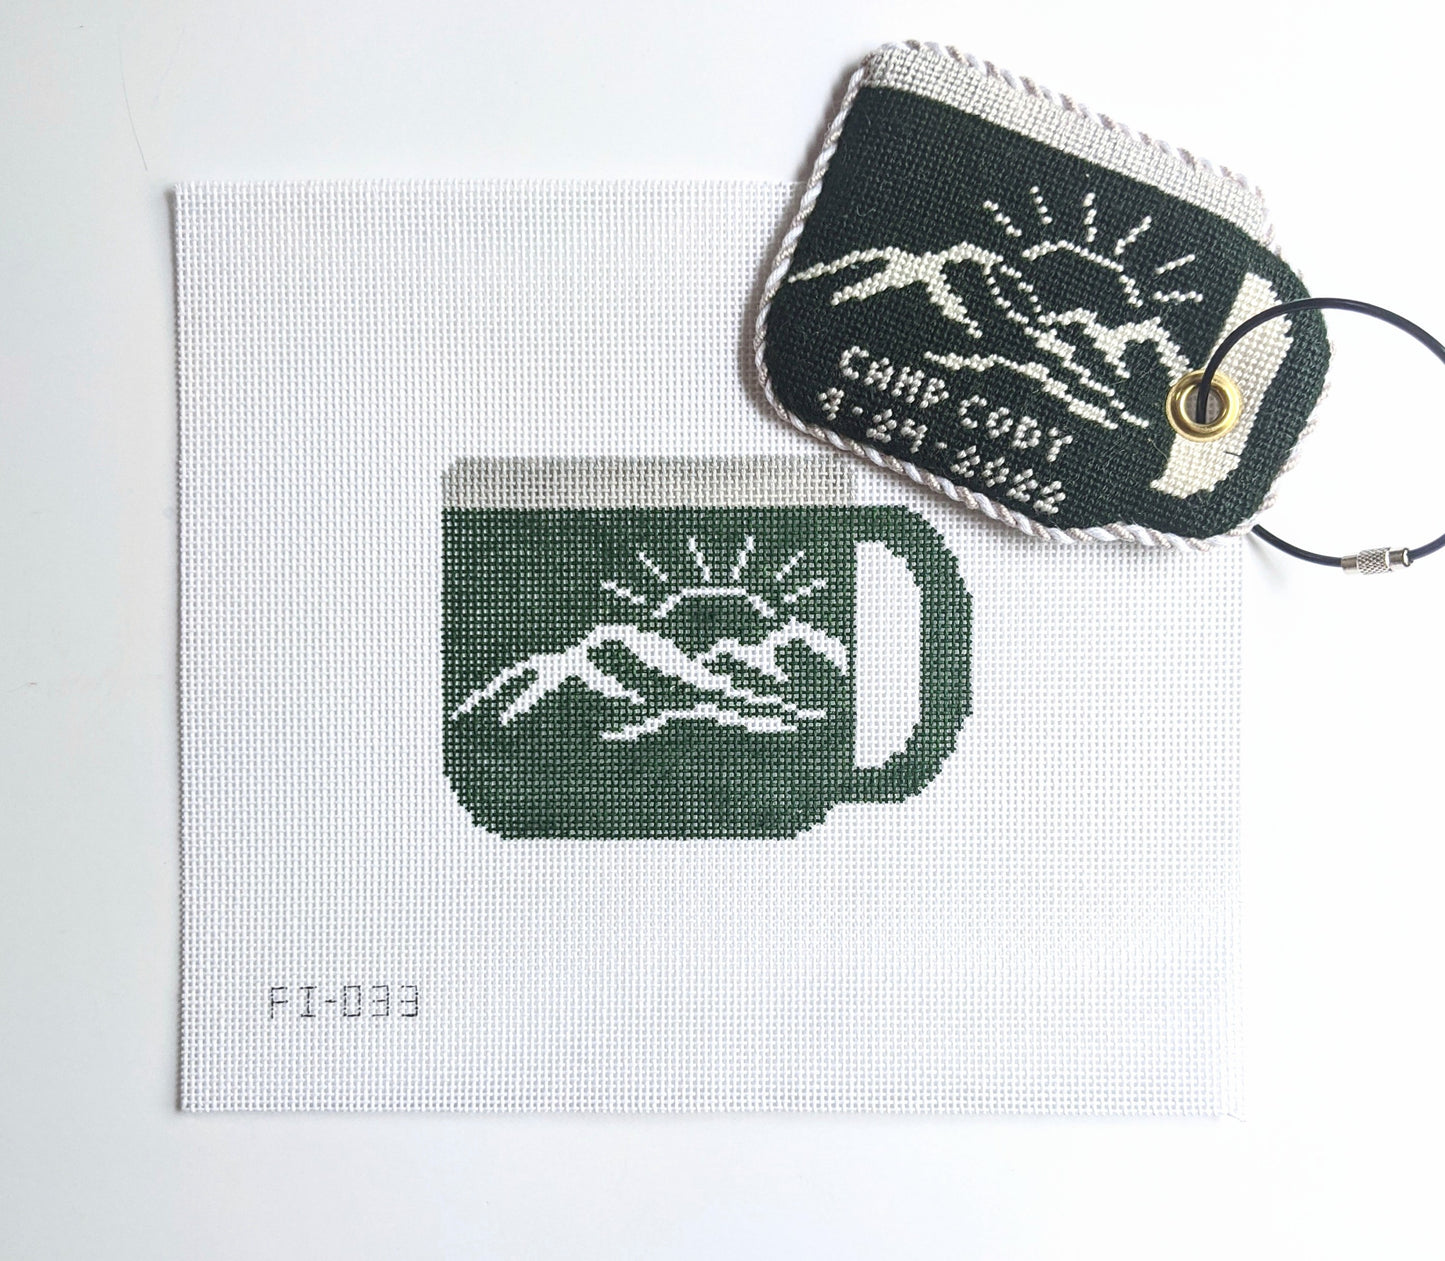 Camping Mugs (Canvas Only or Kit)